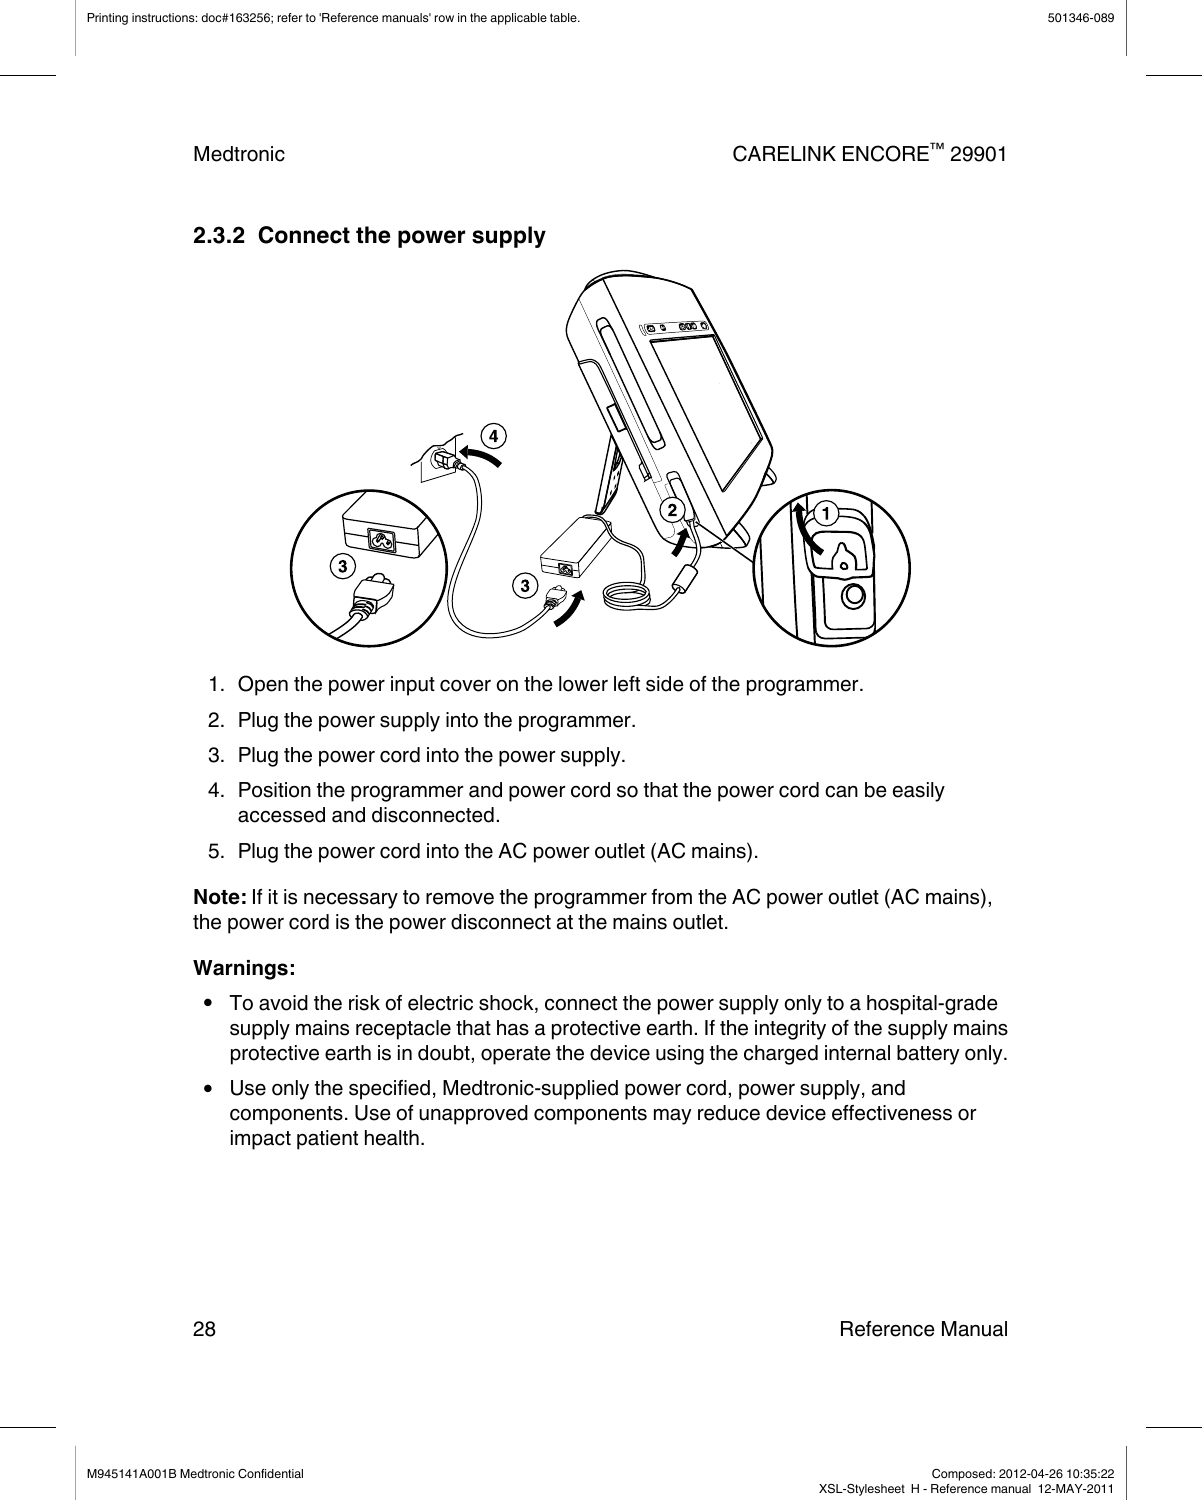 2.3.2  Connect the power supply1. Open the power input cover on the lower left side of the programmer.2. Plug the power supply into the programmer.3. Plug the power cord into the power supply.4. Position the programmer and power cord so that the power cord can be easilyaccessed and disconnected.5. Plug the power cord into the AC power outlet (AC mains).Note: If it is necessary to remove the programmer from the AC power outlet (AC mains),the power cord is the power disconnect at the mains outlet.Warnings:●To avoid the risk of electric shock, connect the power supply only to a hospital-gradesupply mains receptacle that has a protective earth. If the integrity of the supply mainsprotective earth is in doubt, operate the device using the charged internal battery only.●Use only the specified, Medtronic-supplied power cord, power supply, andcomponents. Use of unapproved components may reduce device effectiveness orimpact patient health.Printing instructions: doc#163256; refer to &apos;Reference manuals&apos; row in the applicable table. 501346-089Medtronic CARELINK ENCORE™ 2990128 Reference ManualM945141A001B Medtronic Confidential   Composed: 2012-04-26 10:35:22XSL-Stylesheet  H - Reference manual  12-MAY-2011